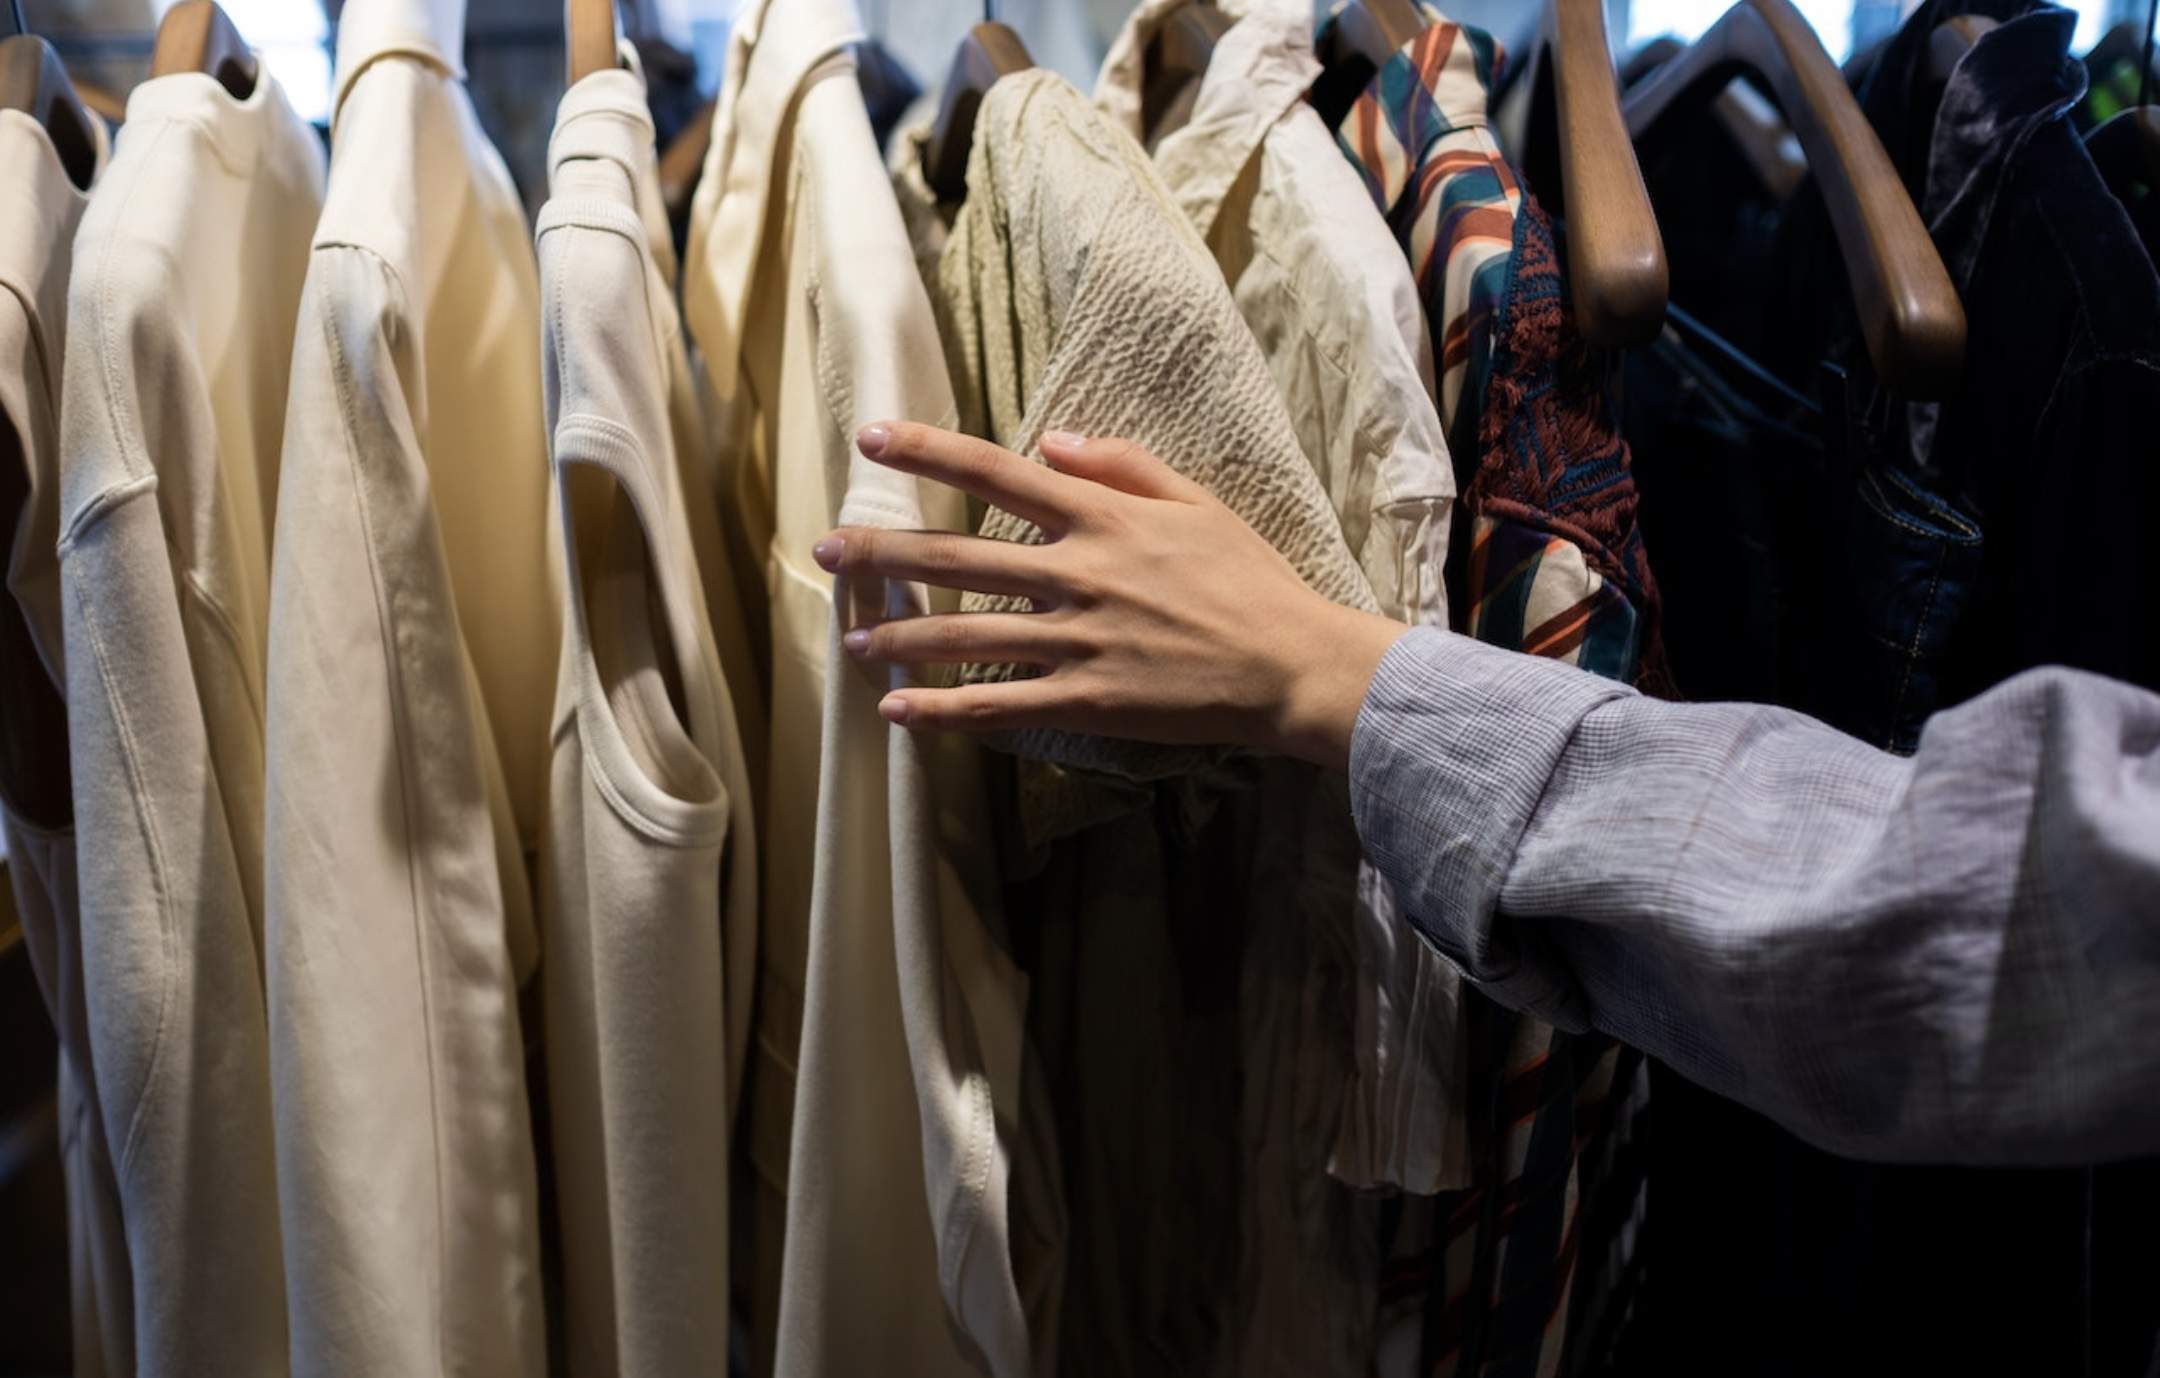 Hanging clothes to embrace sustainability through second-hand fashion